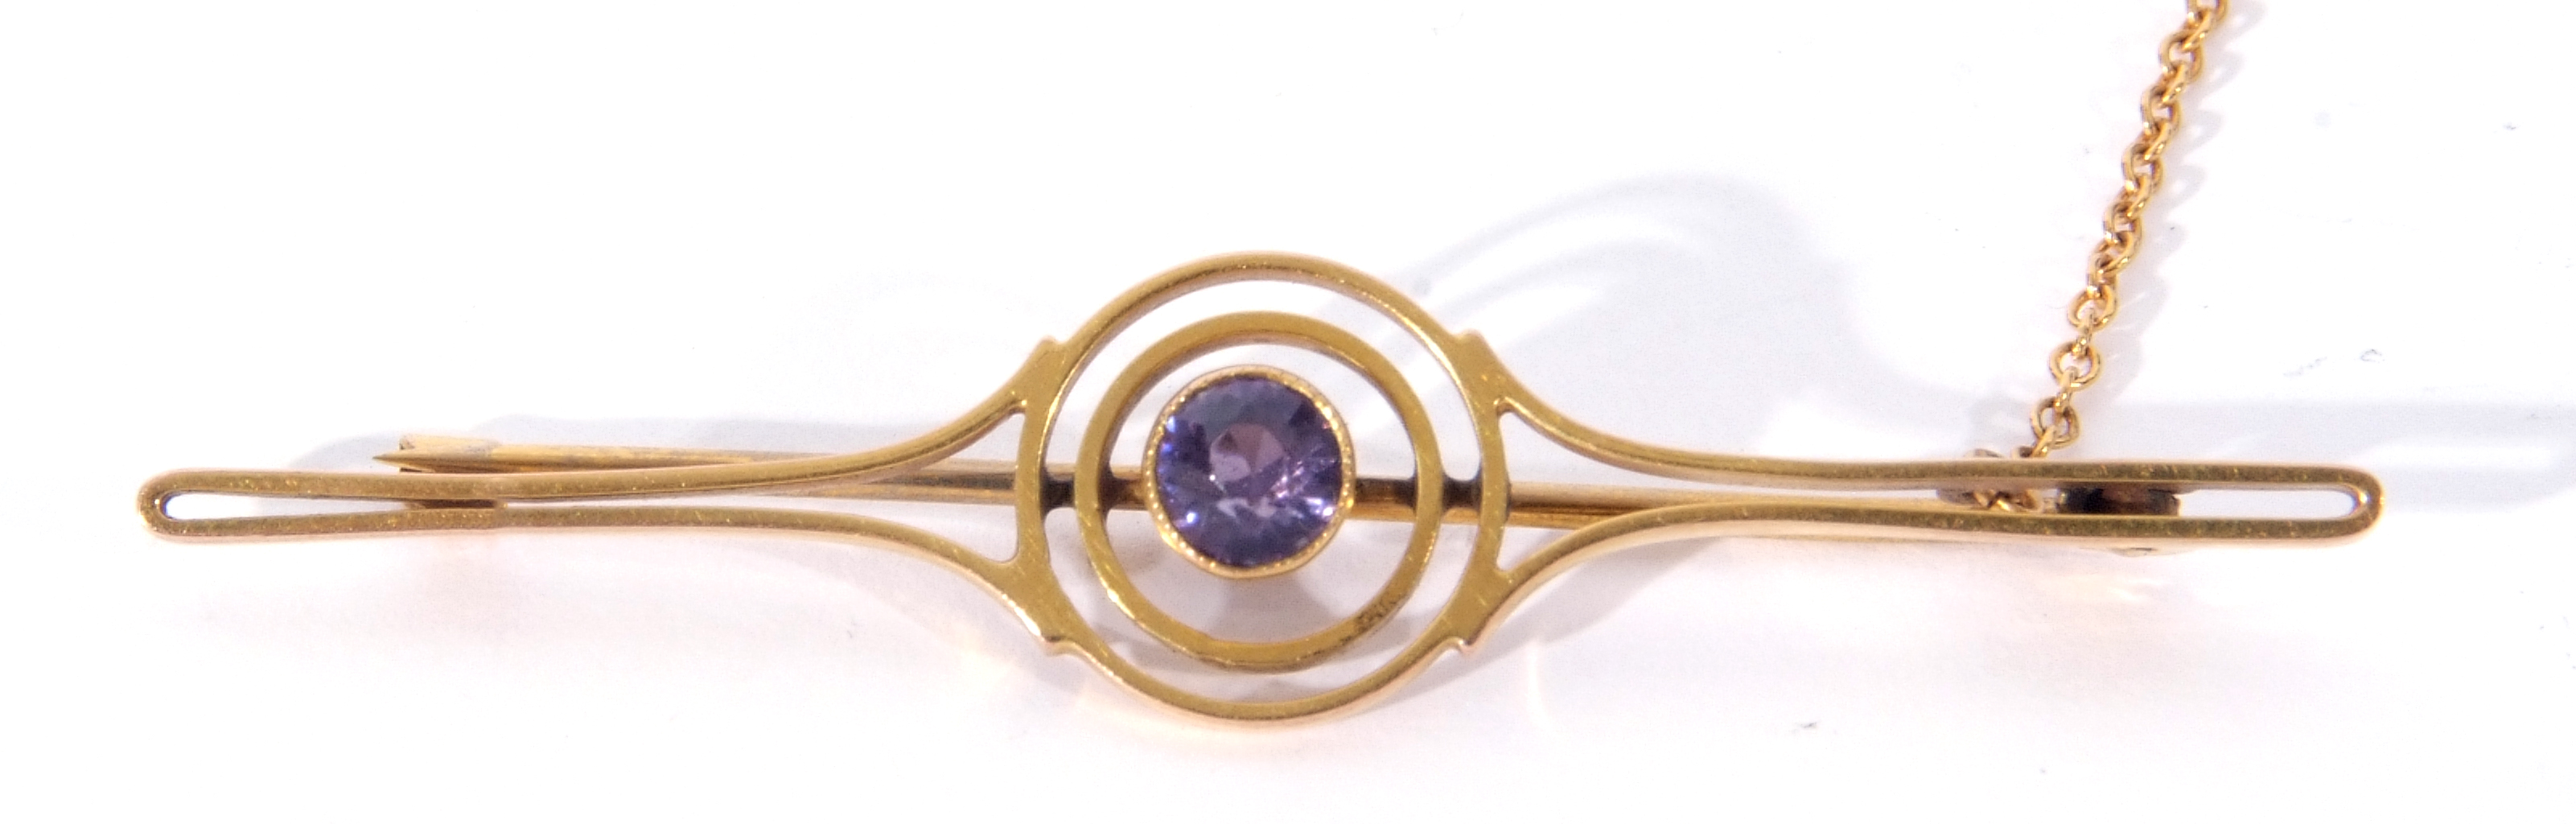 9ct stamped open work brooch centring a round brilliant cut amethyst, 6cm long, g/w 3.2gms